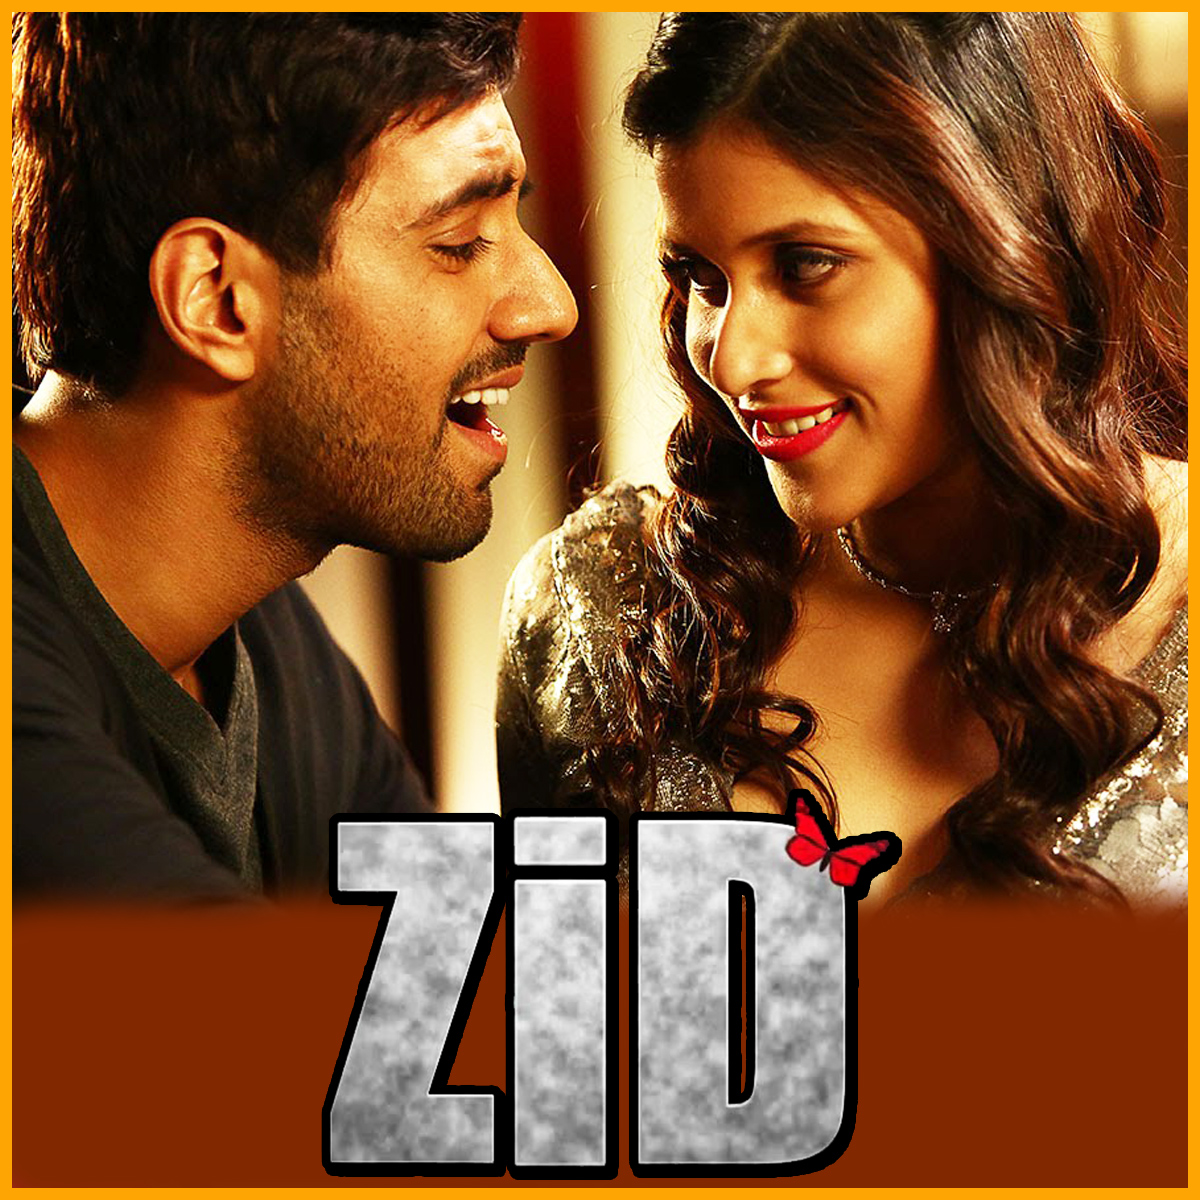 Mareez E Ishq Karaoke Zid Karaoke Download Hindi Mp3 Karaoke ★ lagump3downloads.com on lagump3downloads.com we do not stay all the mp3 files as they are in different websites from which. mareez e ishq zid mp3 format